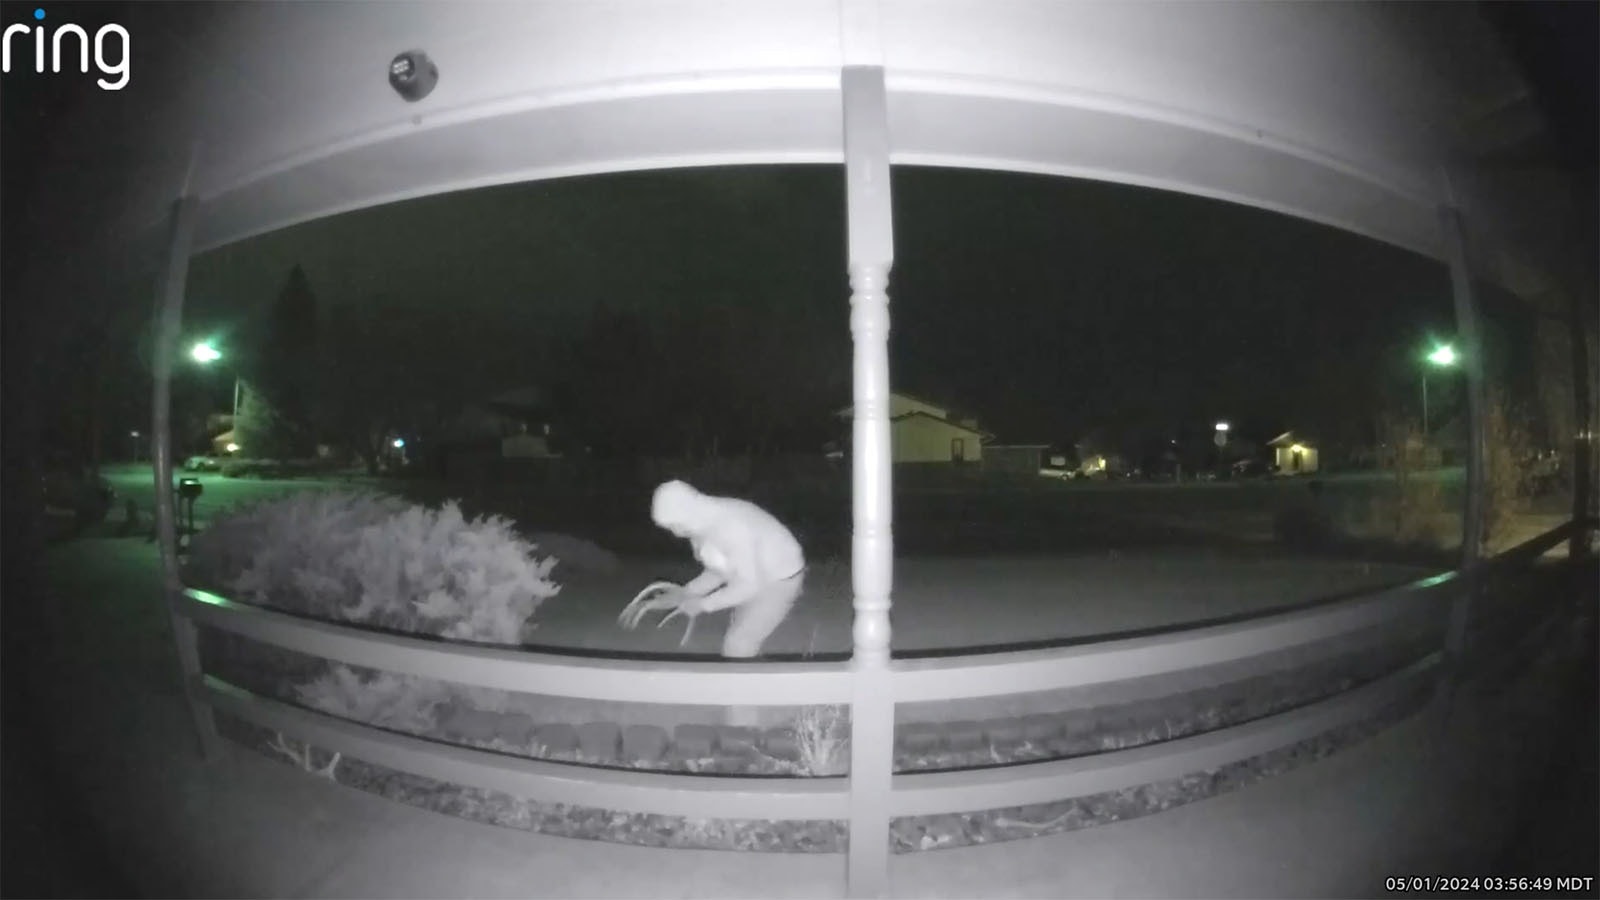 The Ring doorbell camera of a Casper home caught an antler theif at about 4 a.m. Wednesday stealing all the shed antlers in the home's landscaping.